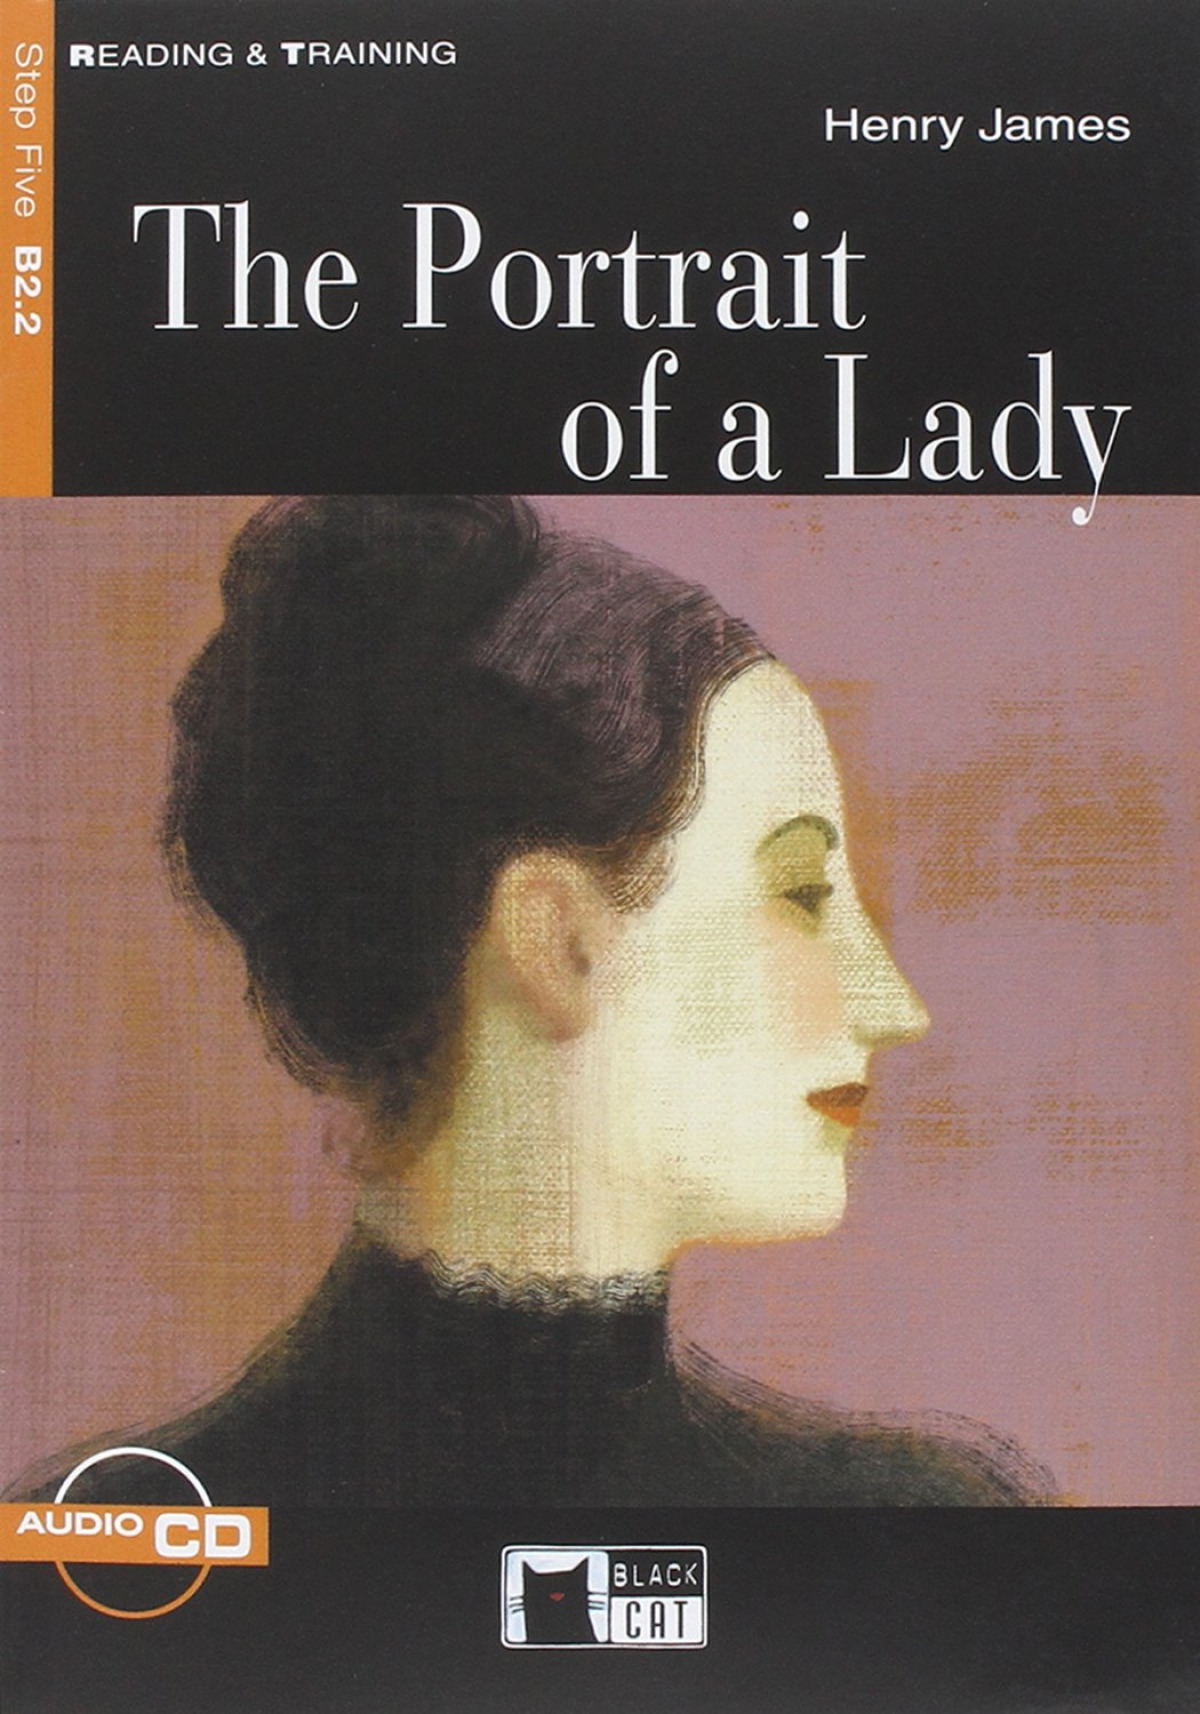 The portrait of a lady. book + cd - James, Henry